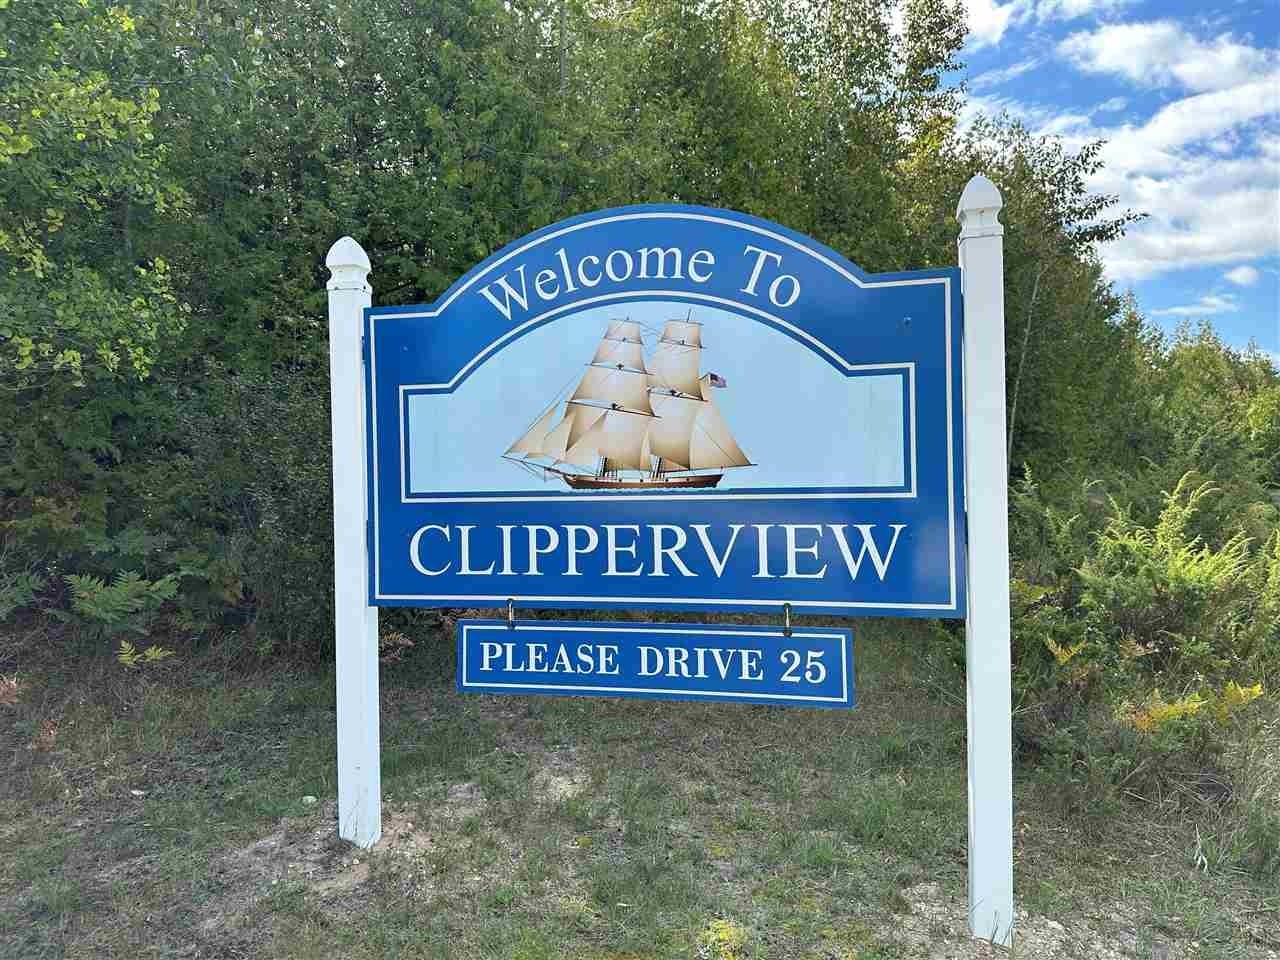 1. Tbd Clipperview